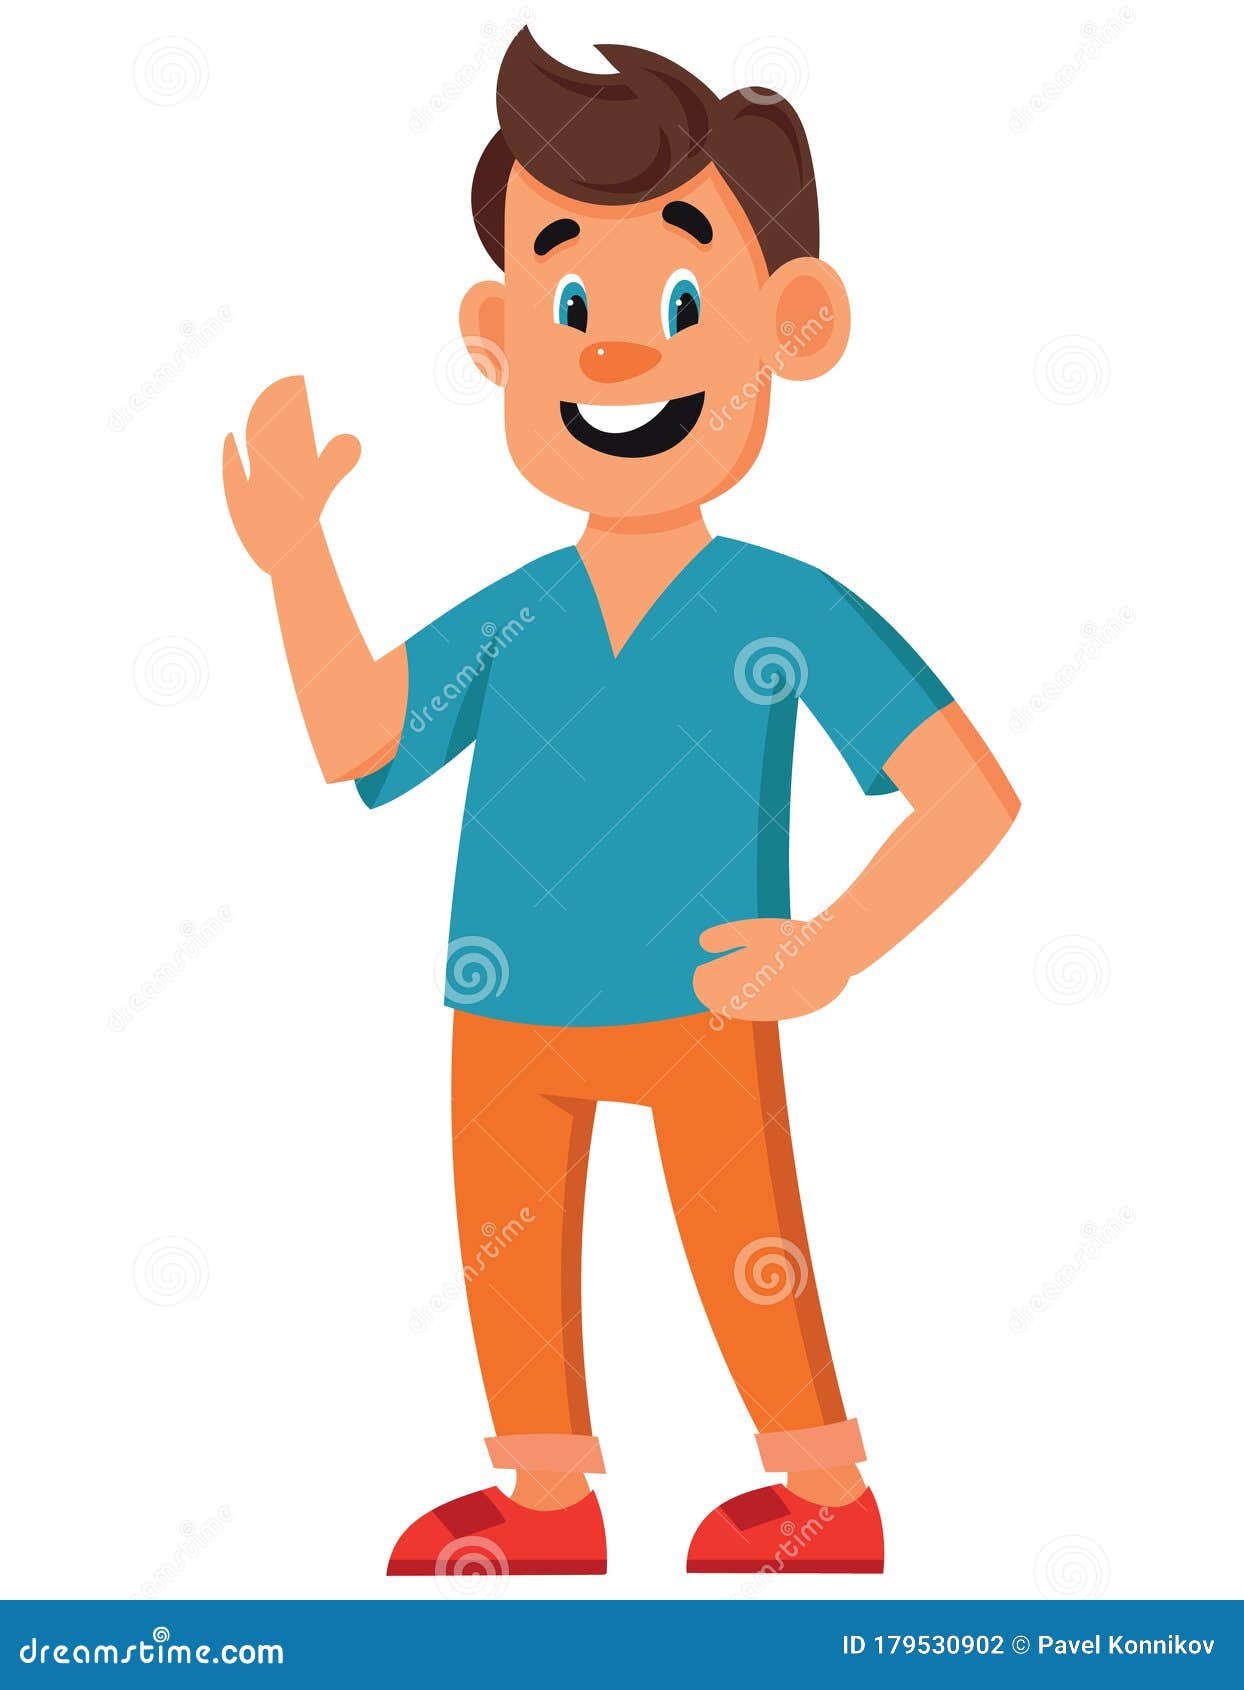 Smiling Man in Cartoon Style. Stock Vector - Illustration of vector, happy:  179530902